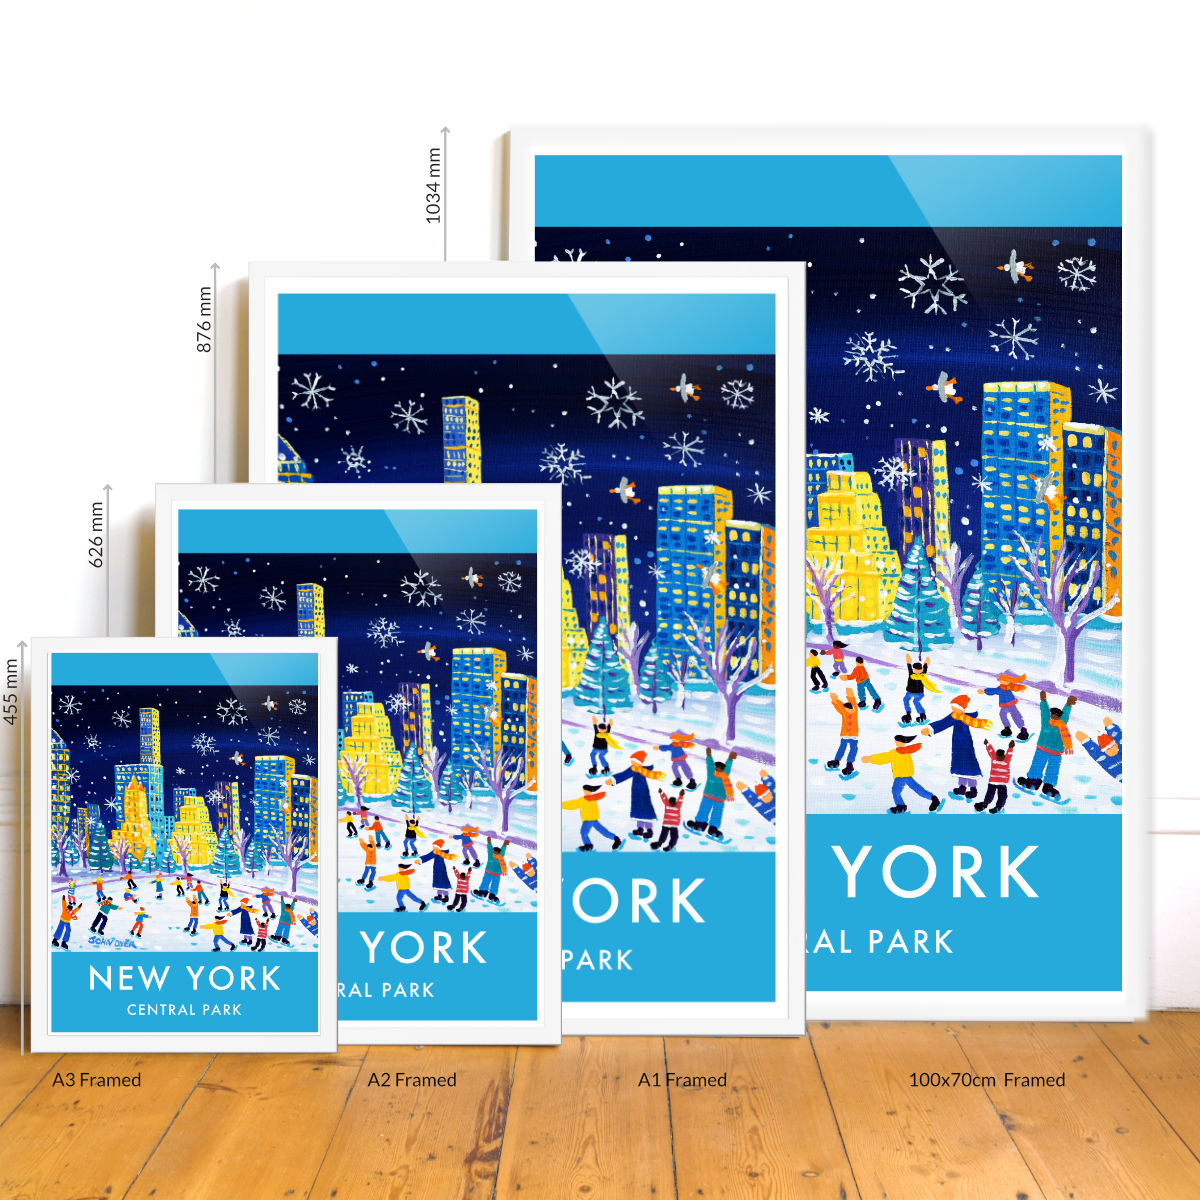 New York City Prints. Central Park Ice Skating. Vintage Style Travel Poster Art Print by John Dyer. Wall Art Gallery NY